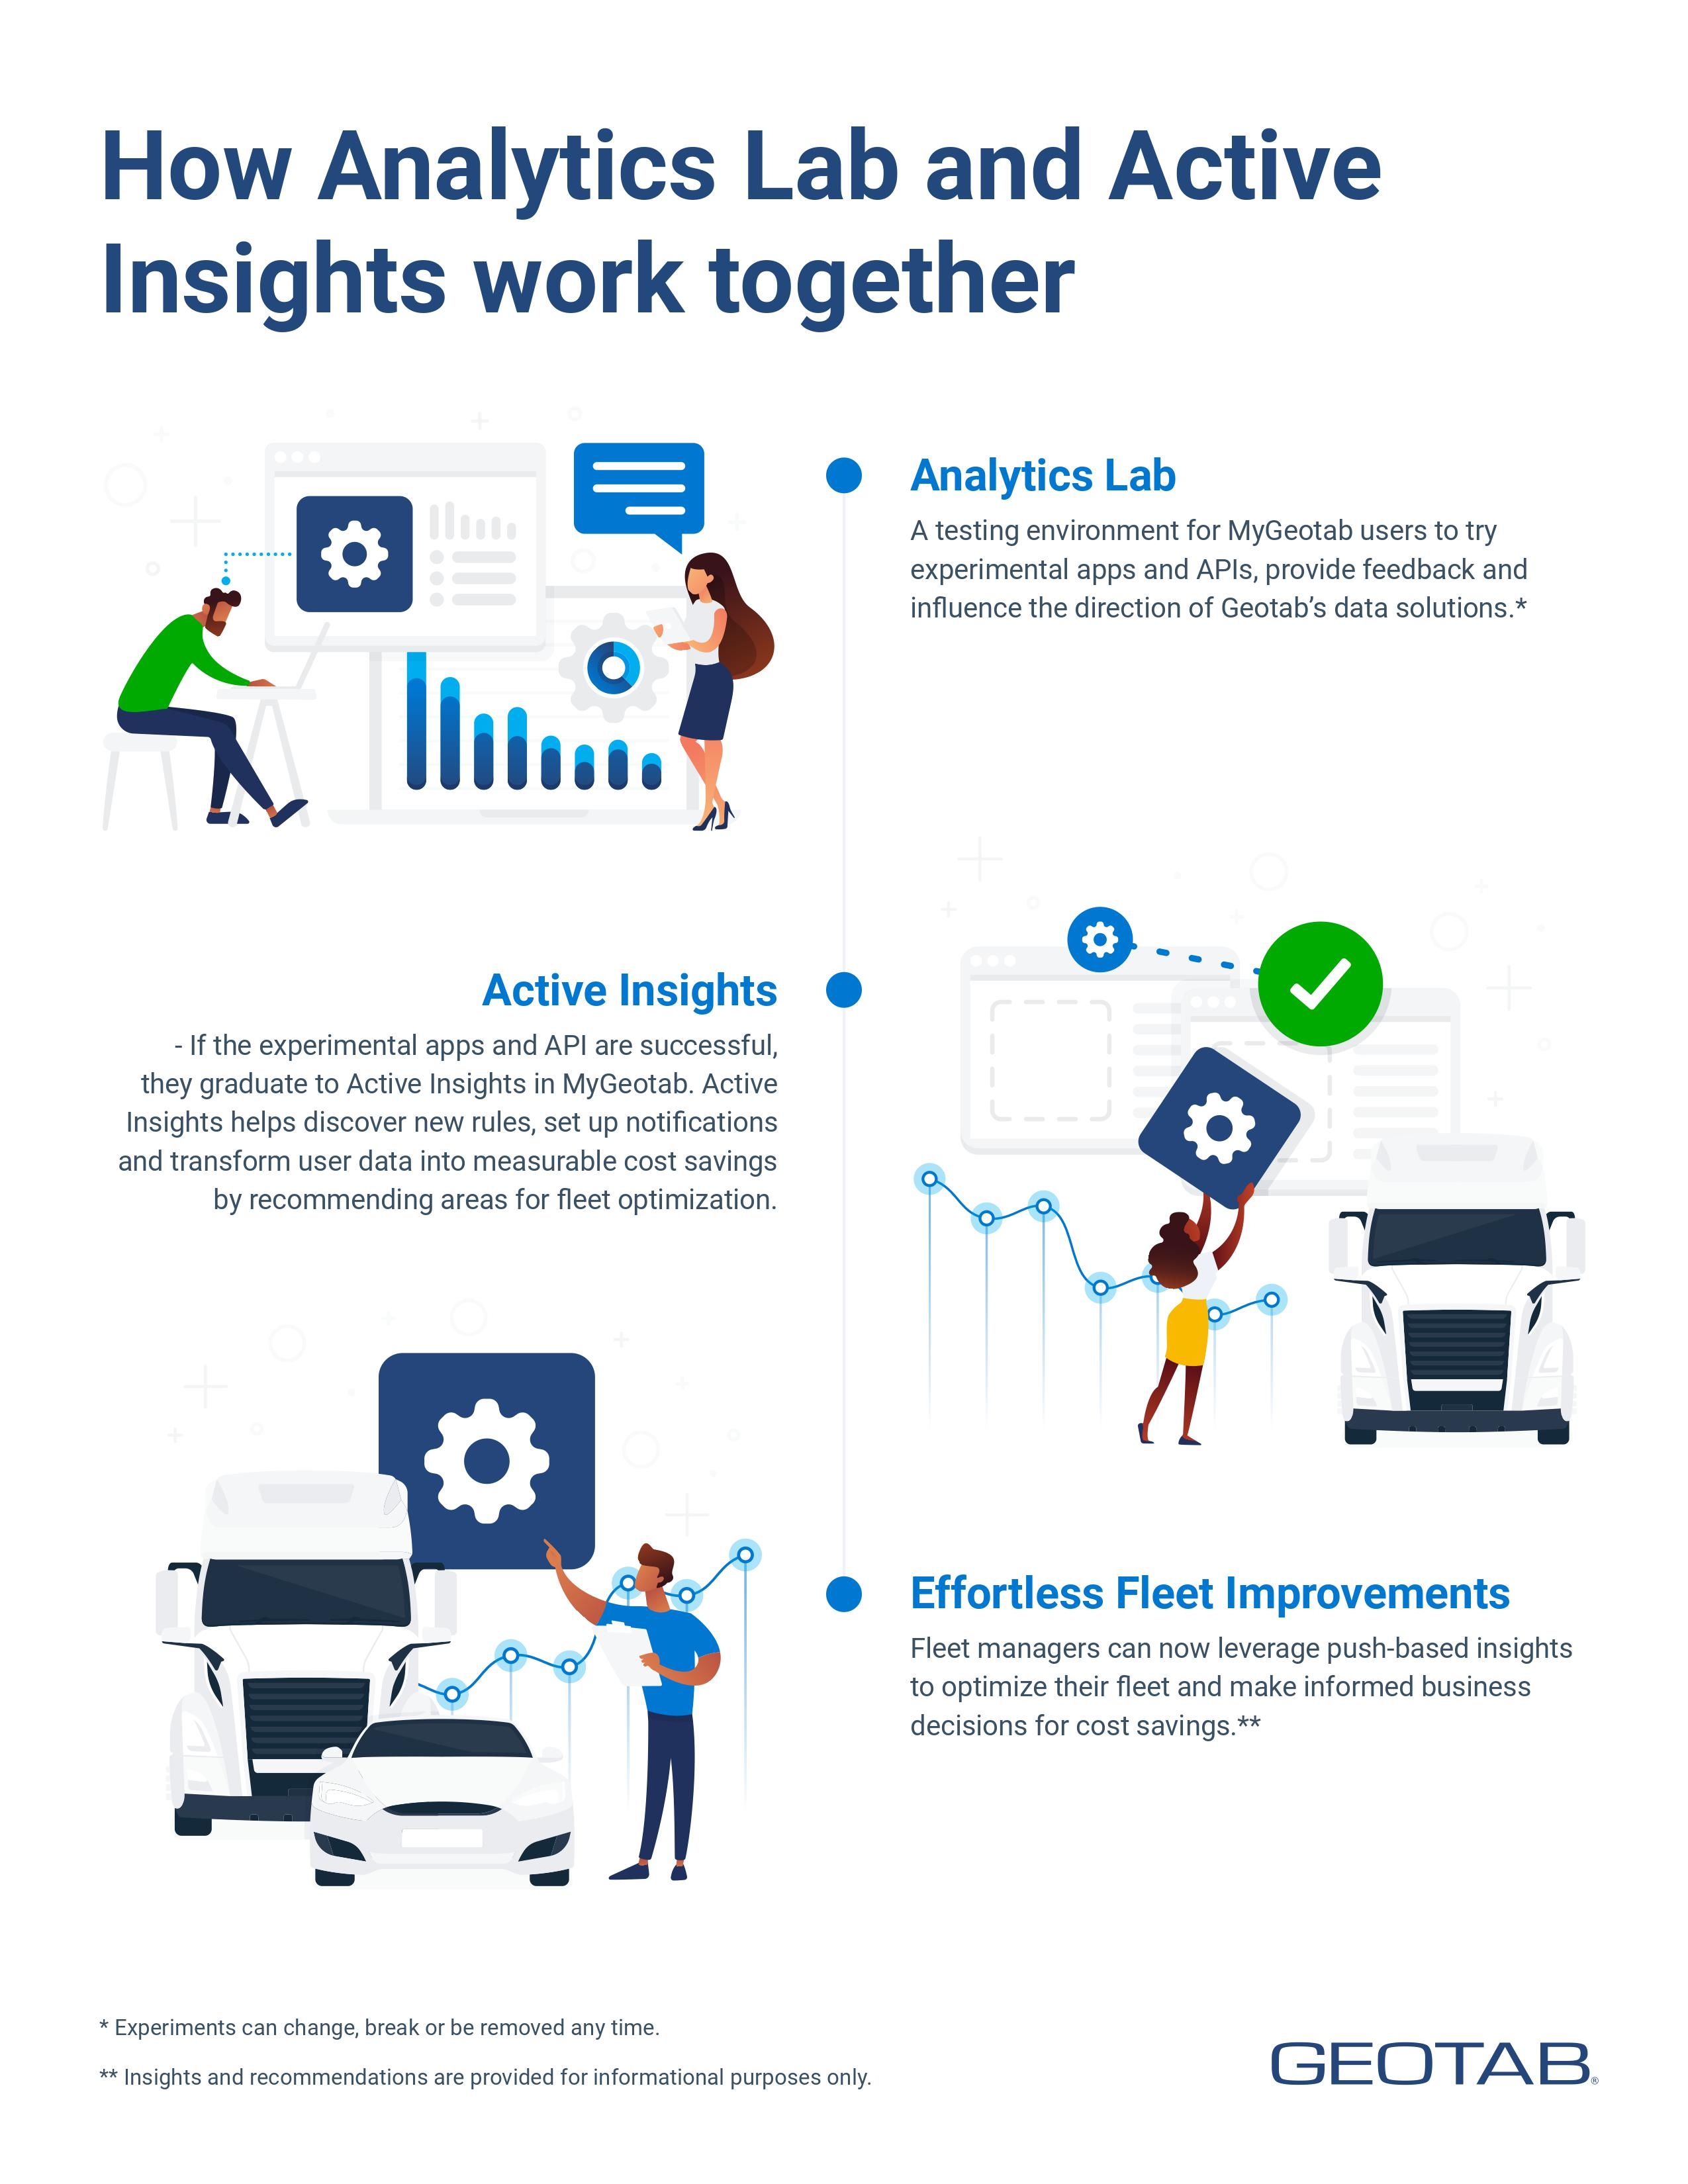 How Analytics Lab and Active Insights work together